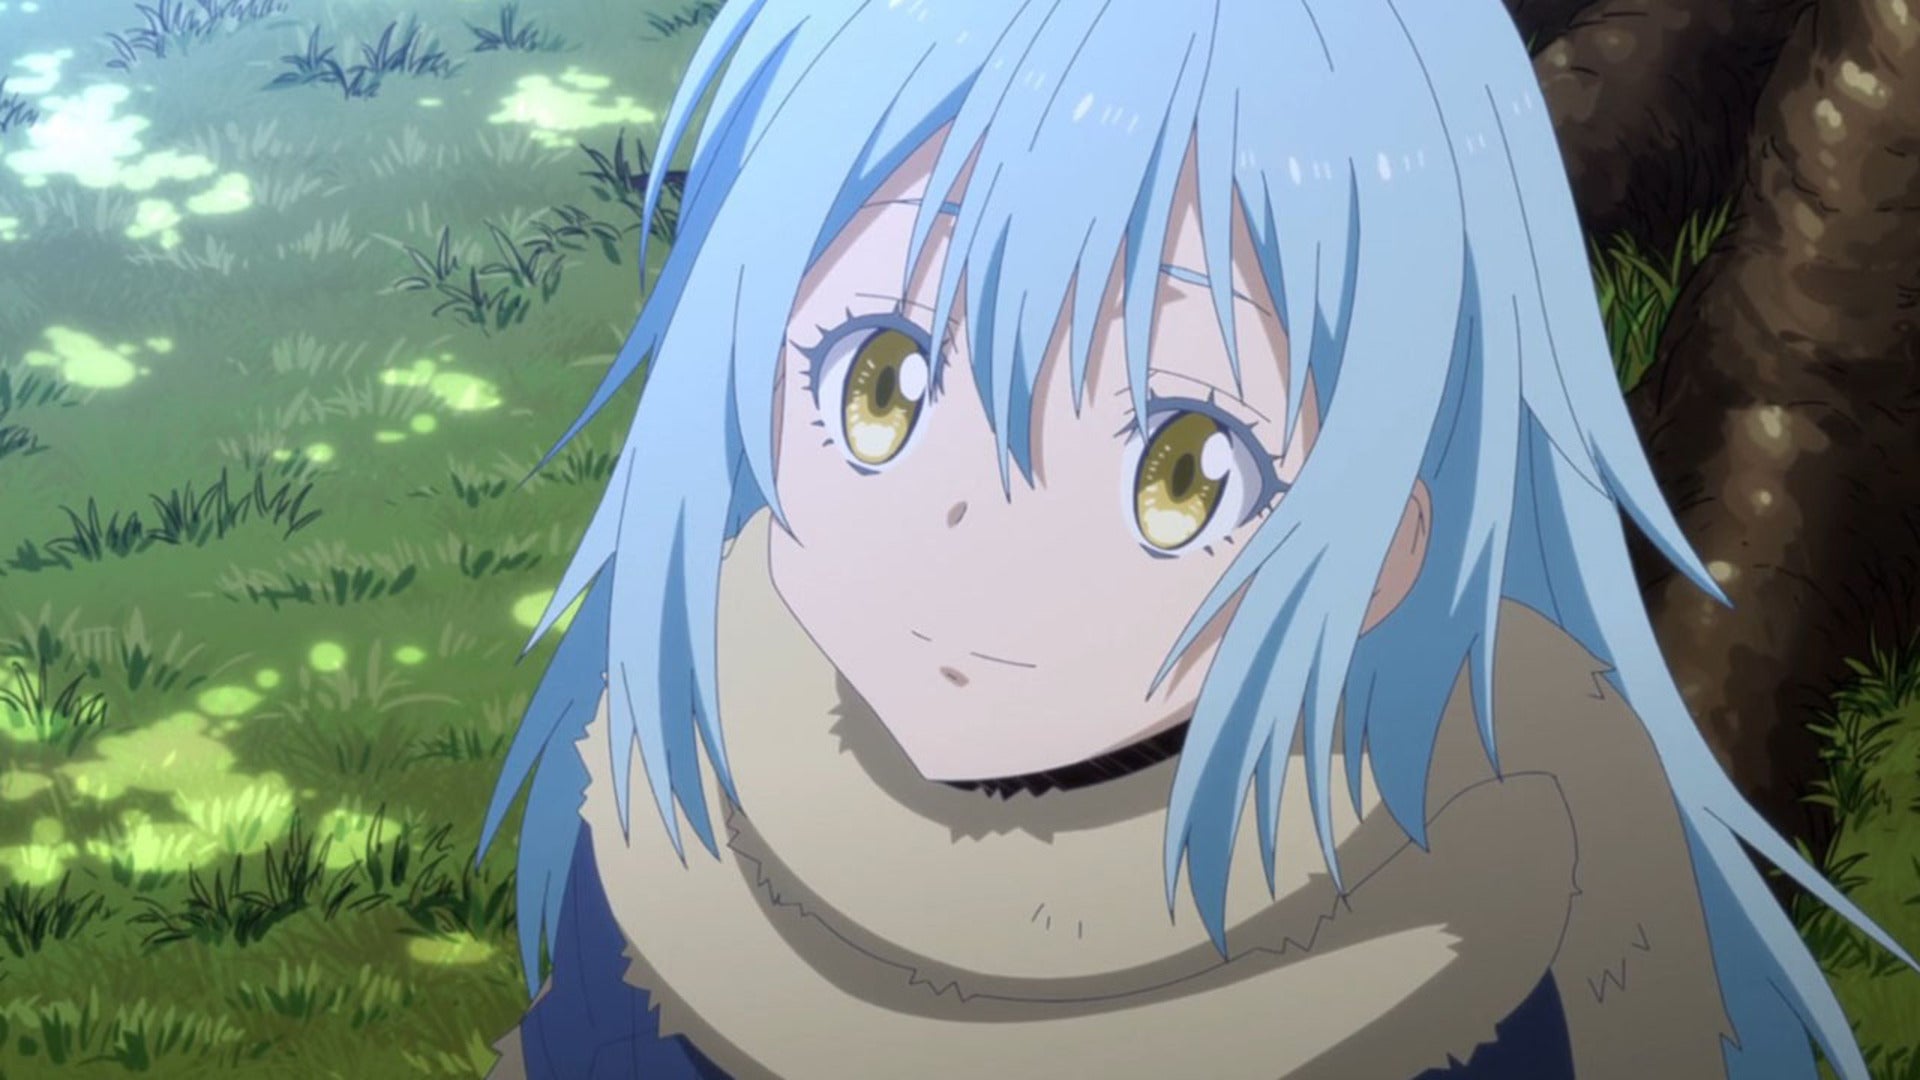 That Time I Got Reincarnated as a Slime Anime still - Rimuru is standing in the shade of a tree, looking up at the sky